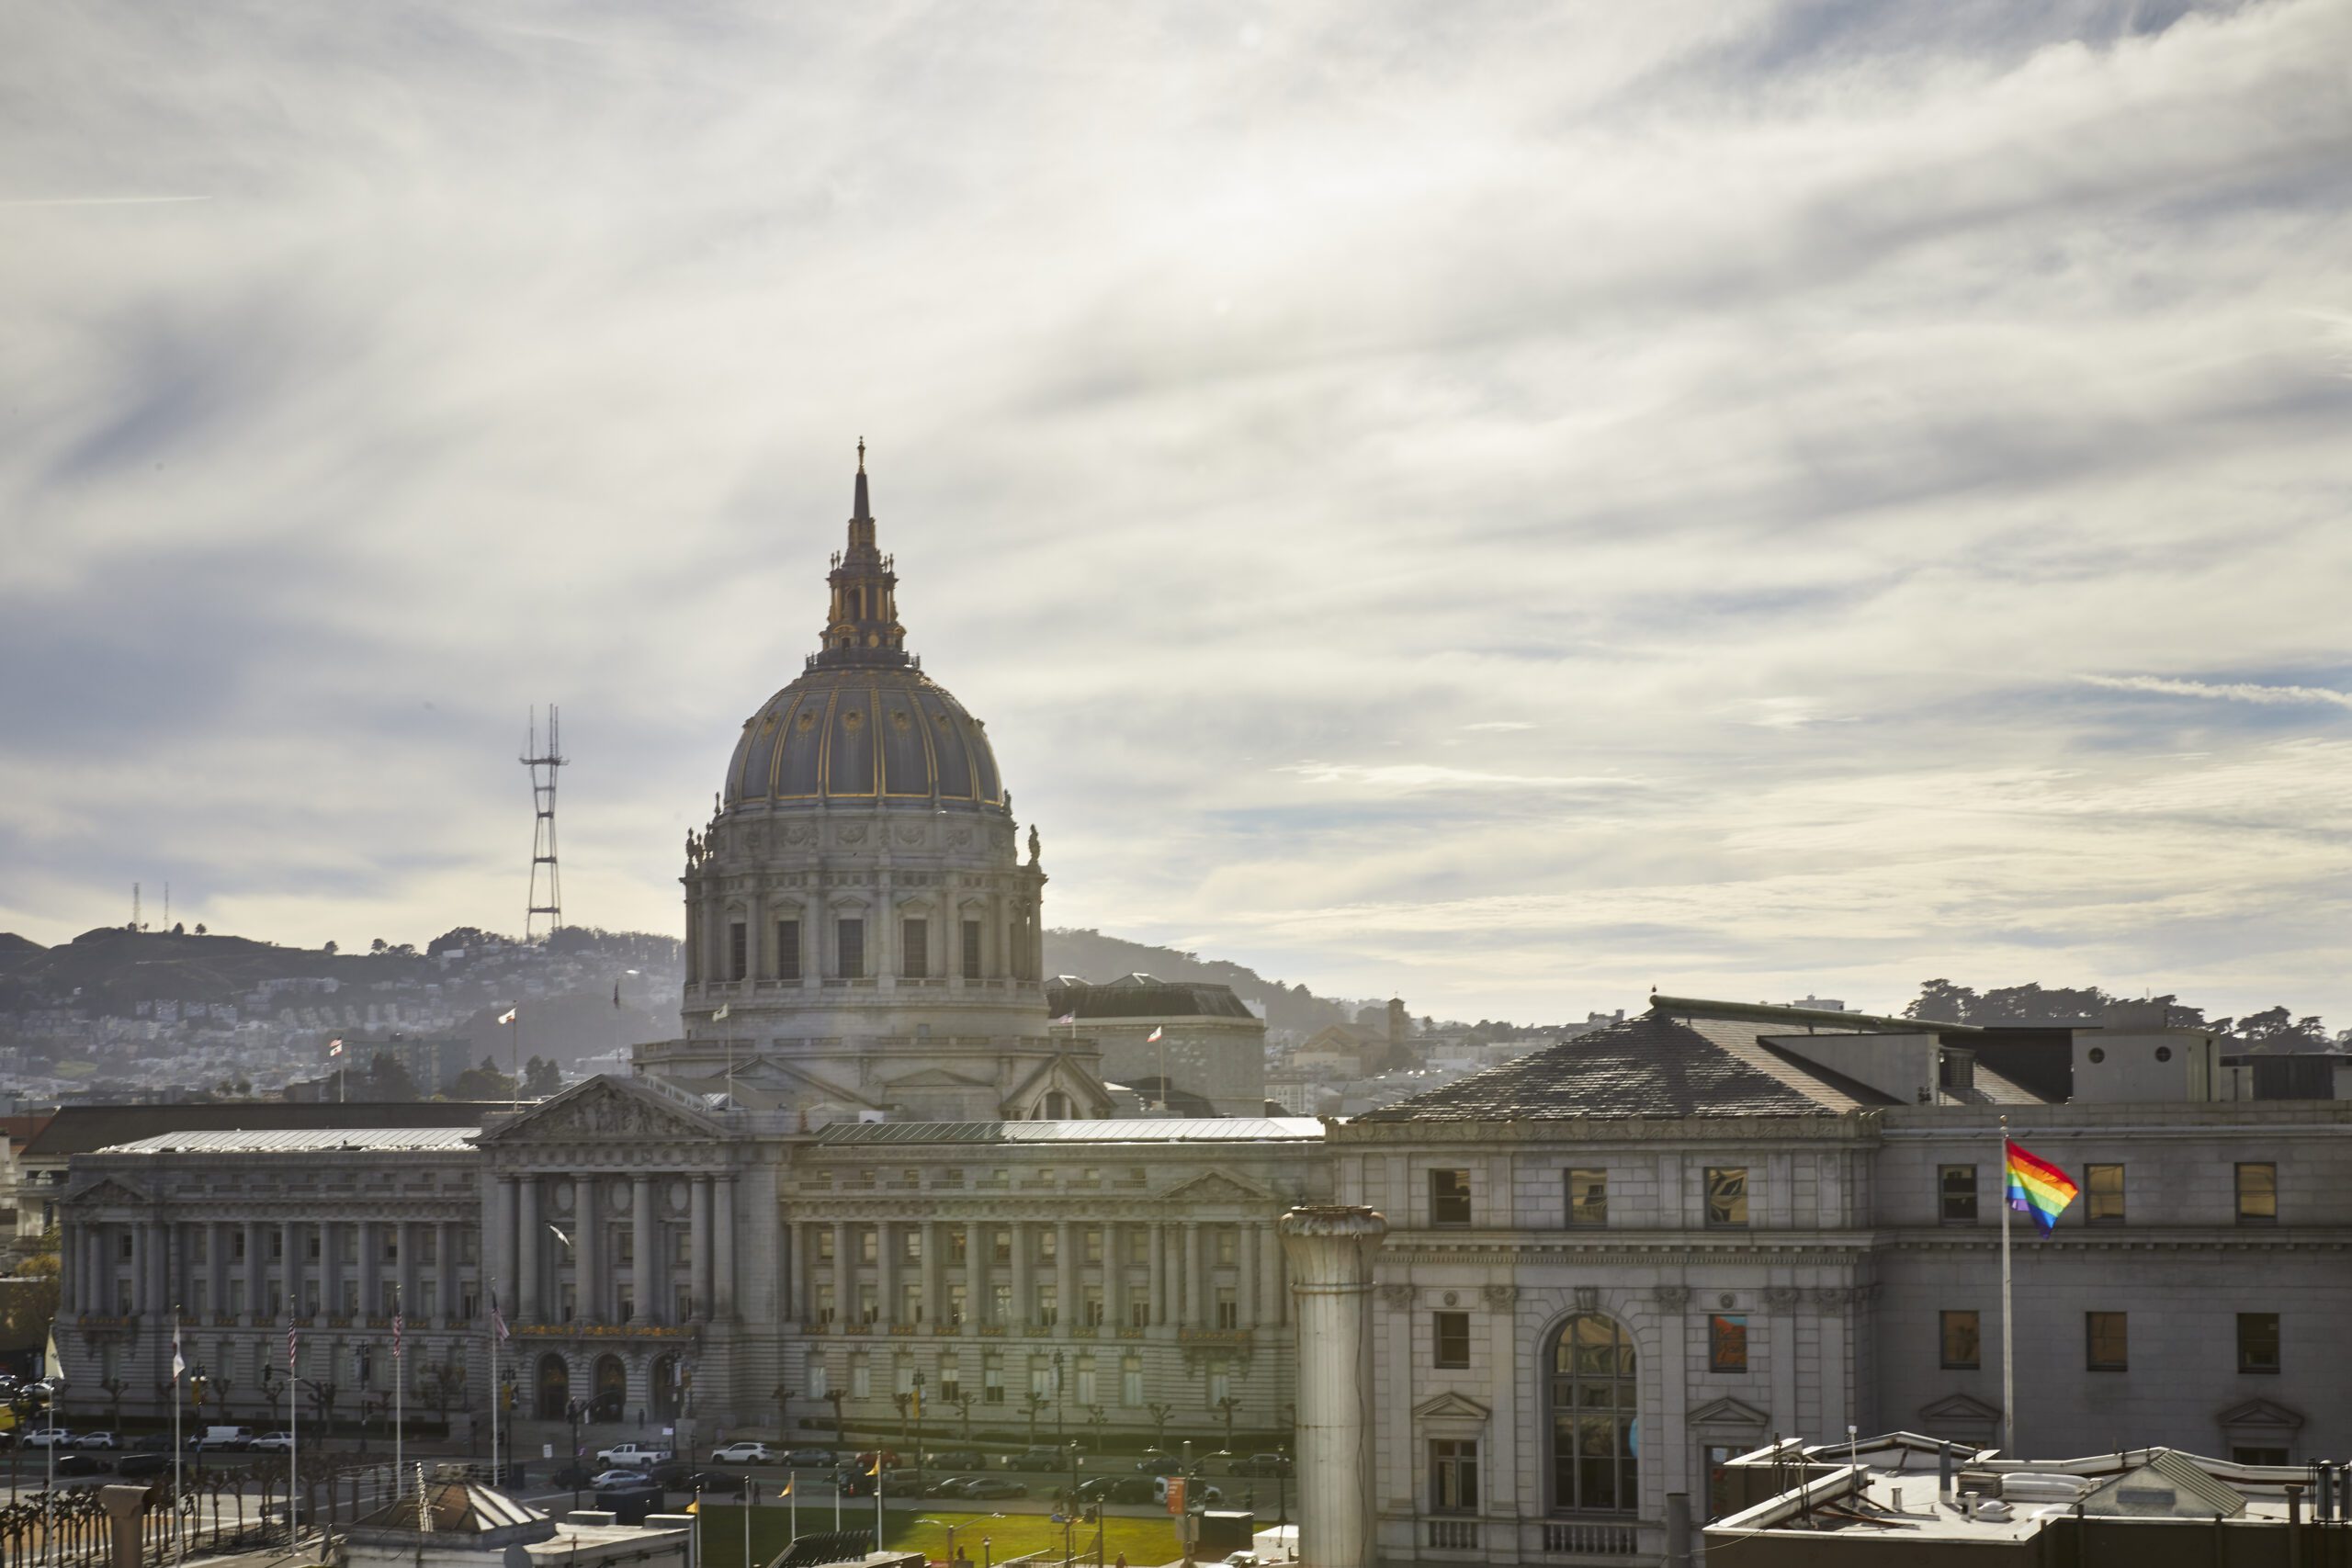 Aerial shot of dome building, SF city hall. Cloudy skies, sun shining in the backdrop